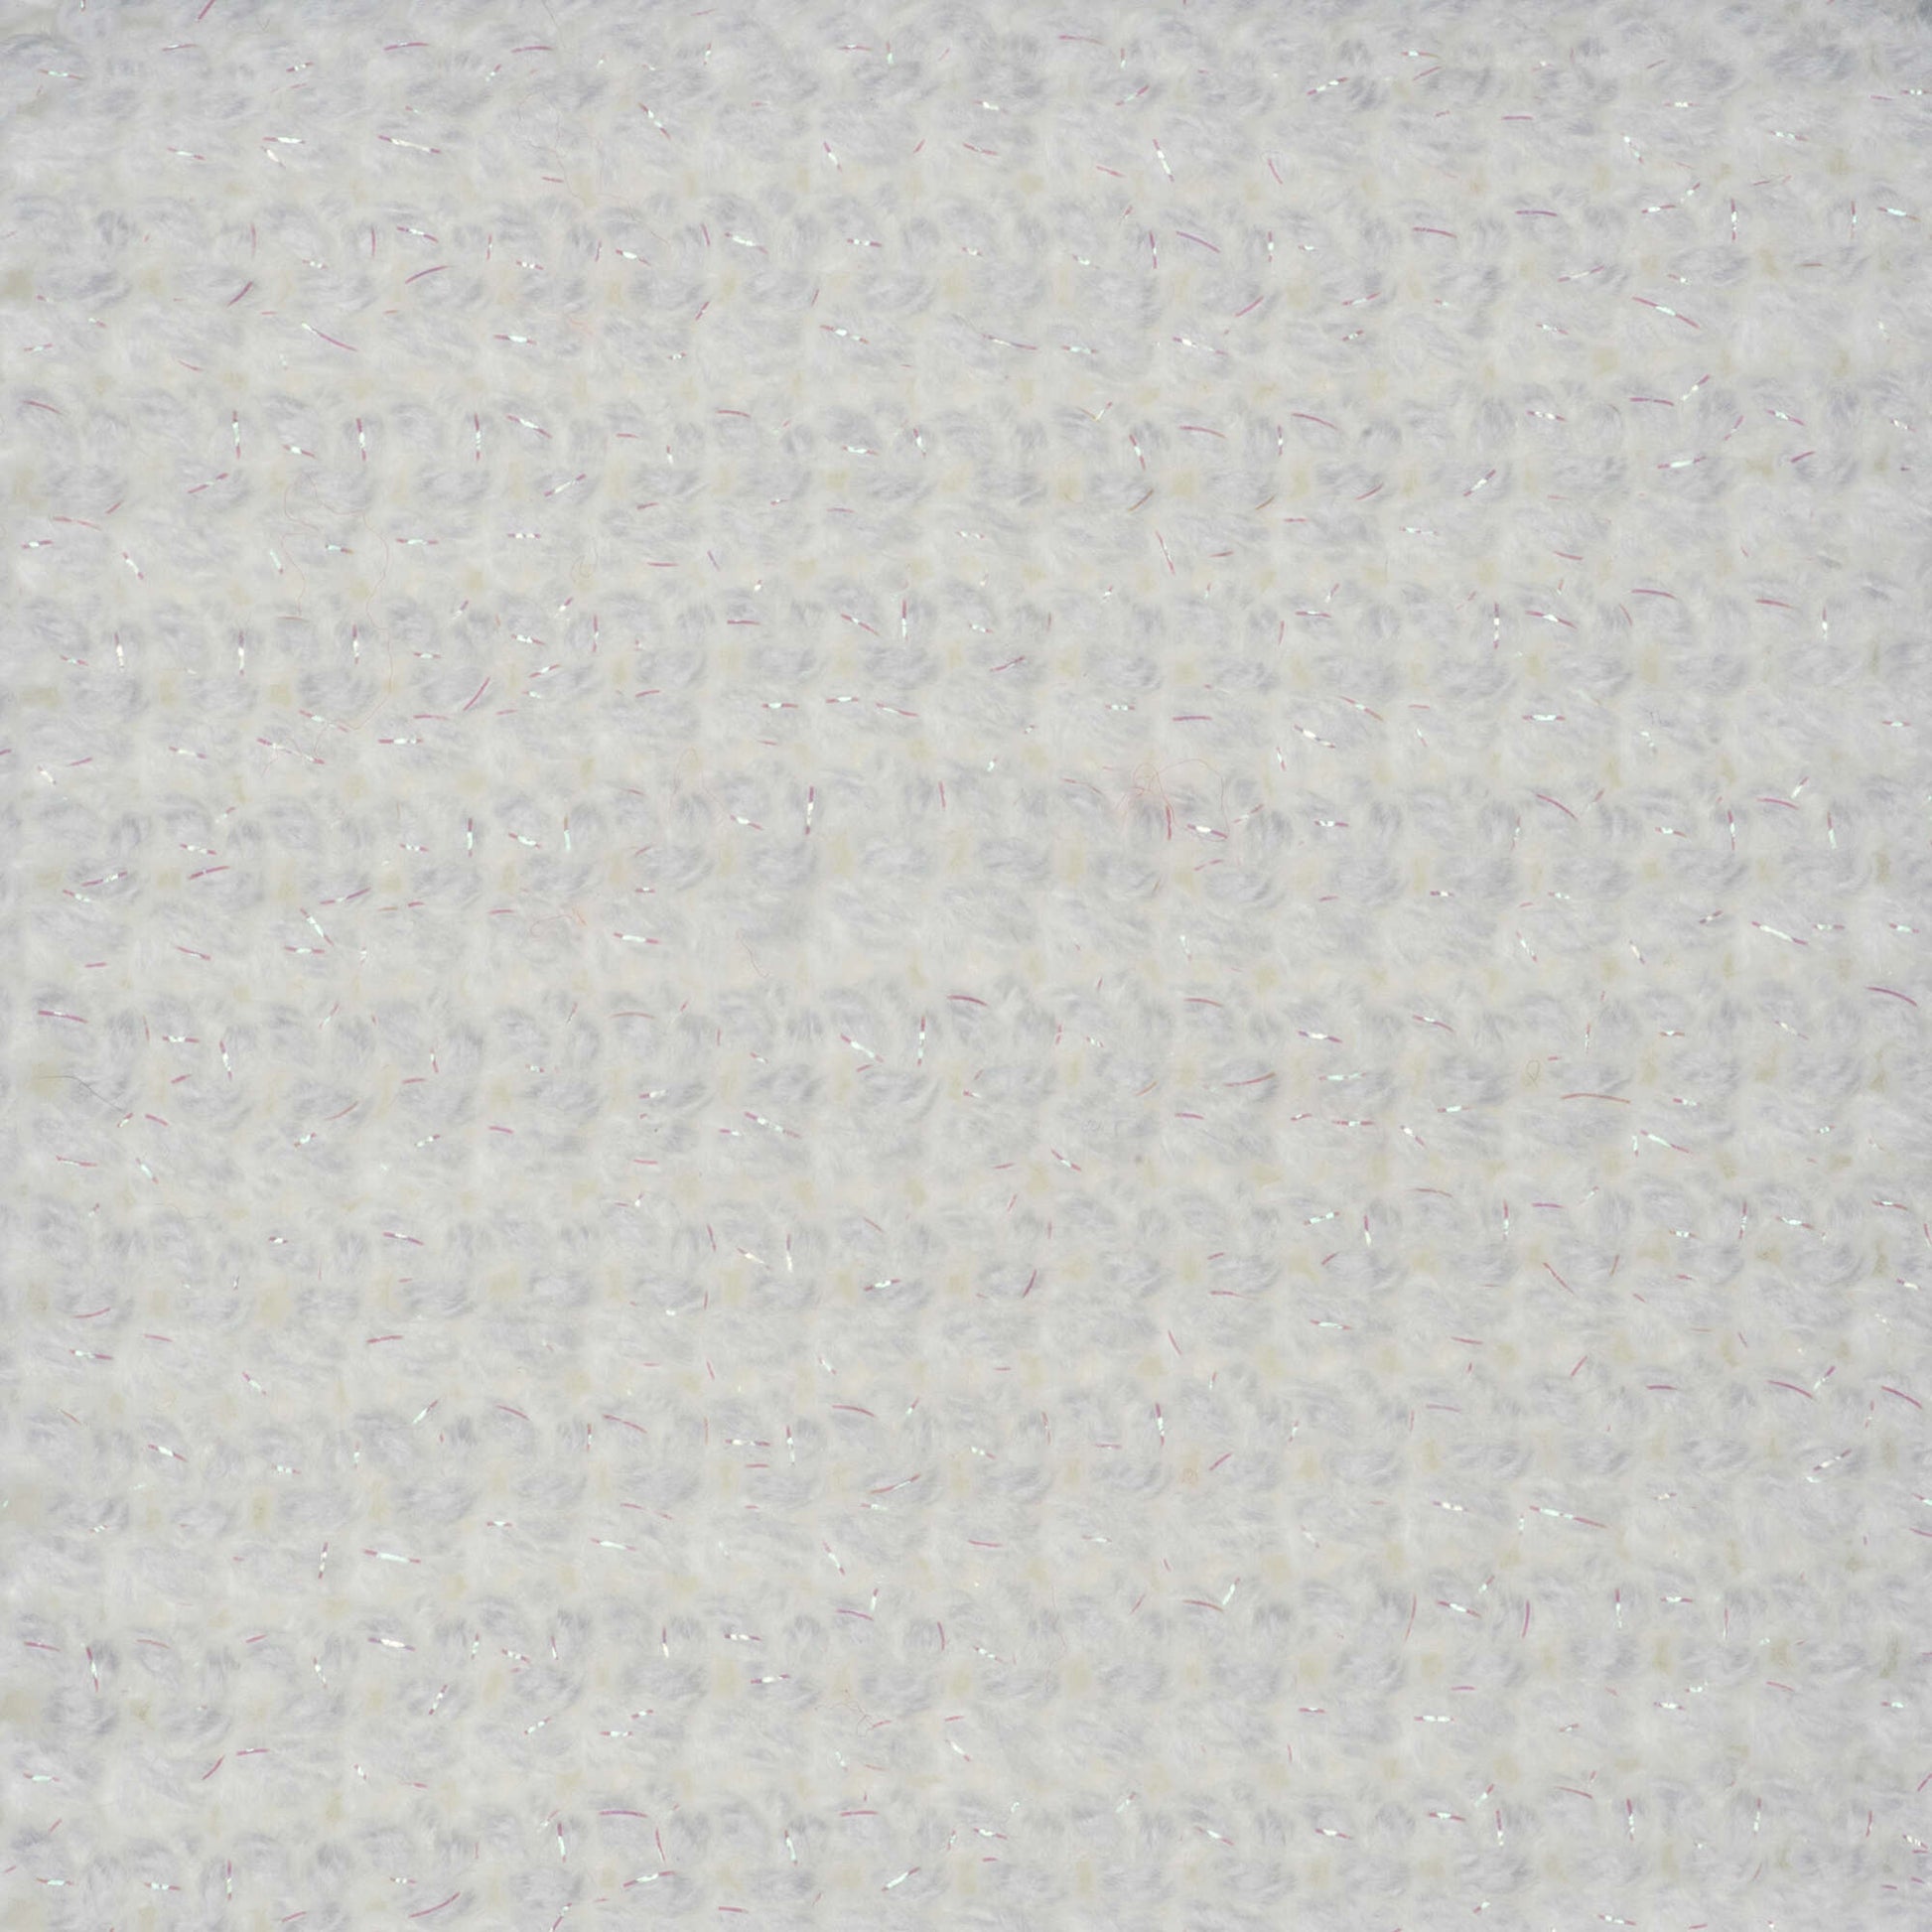 Red Heart With Love Metallic Yarn - Discontinued shades White